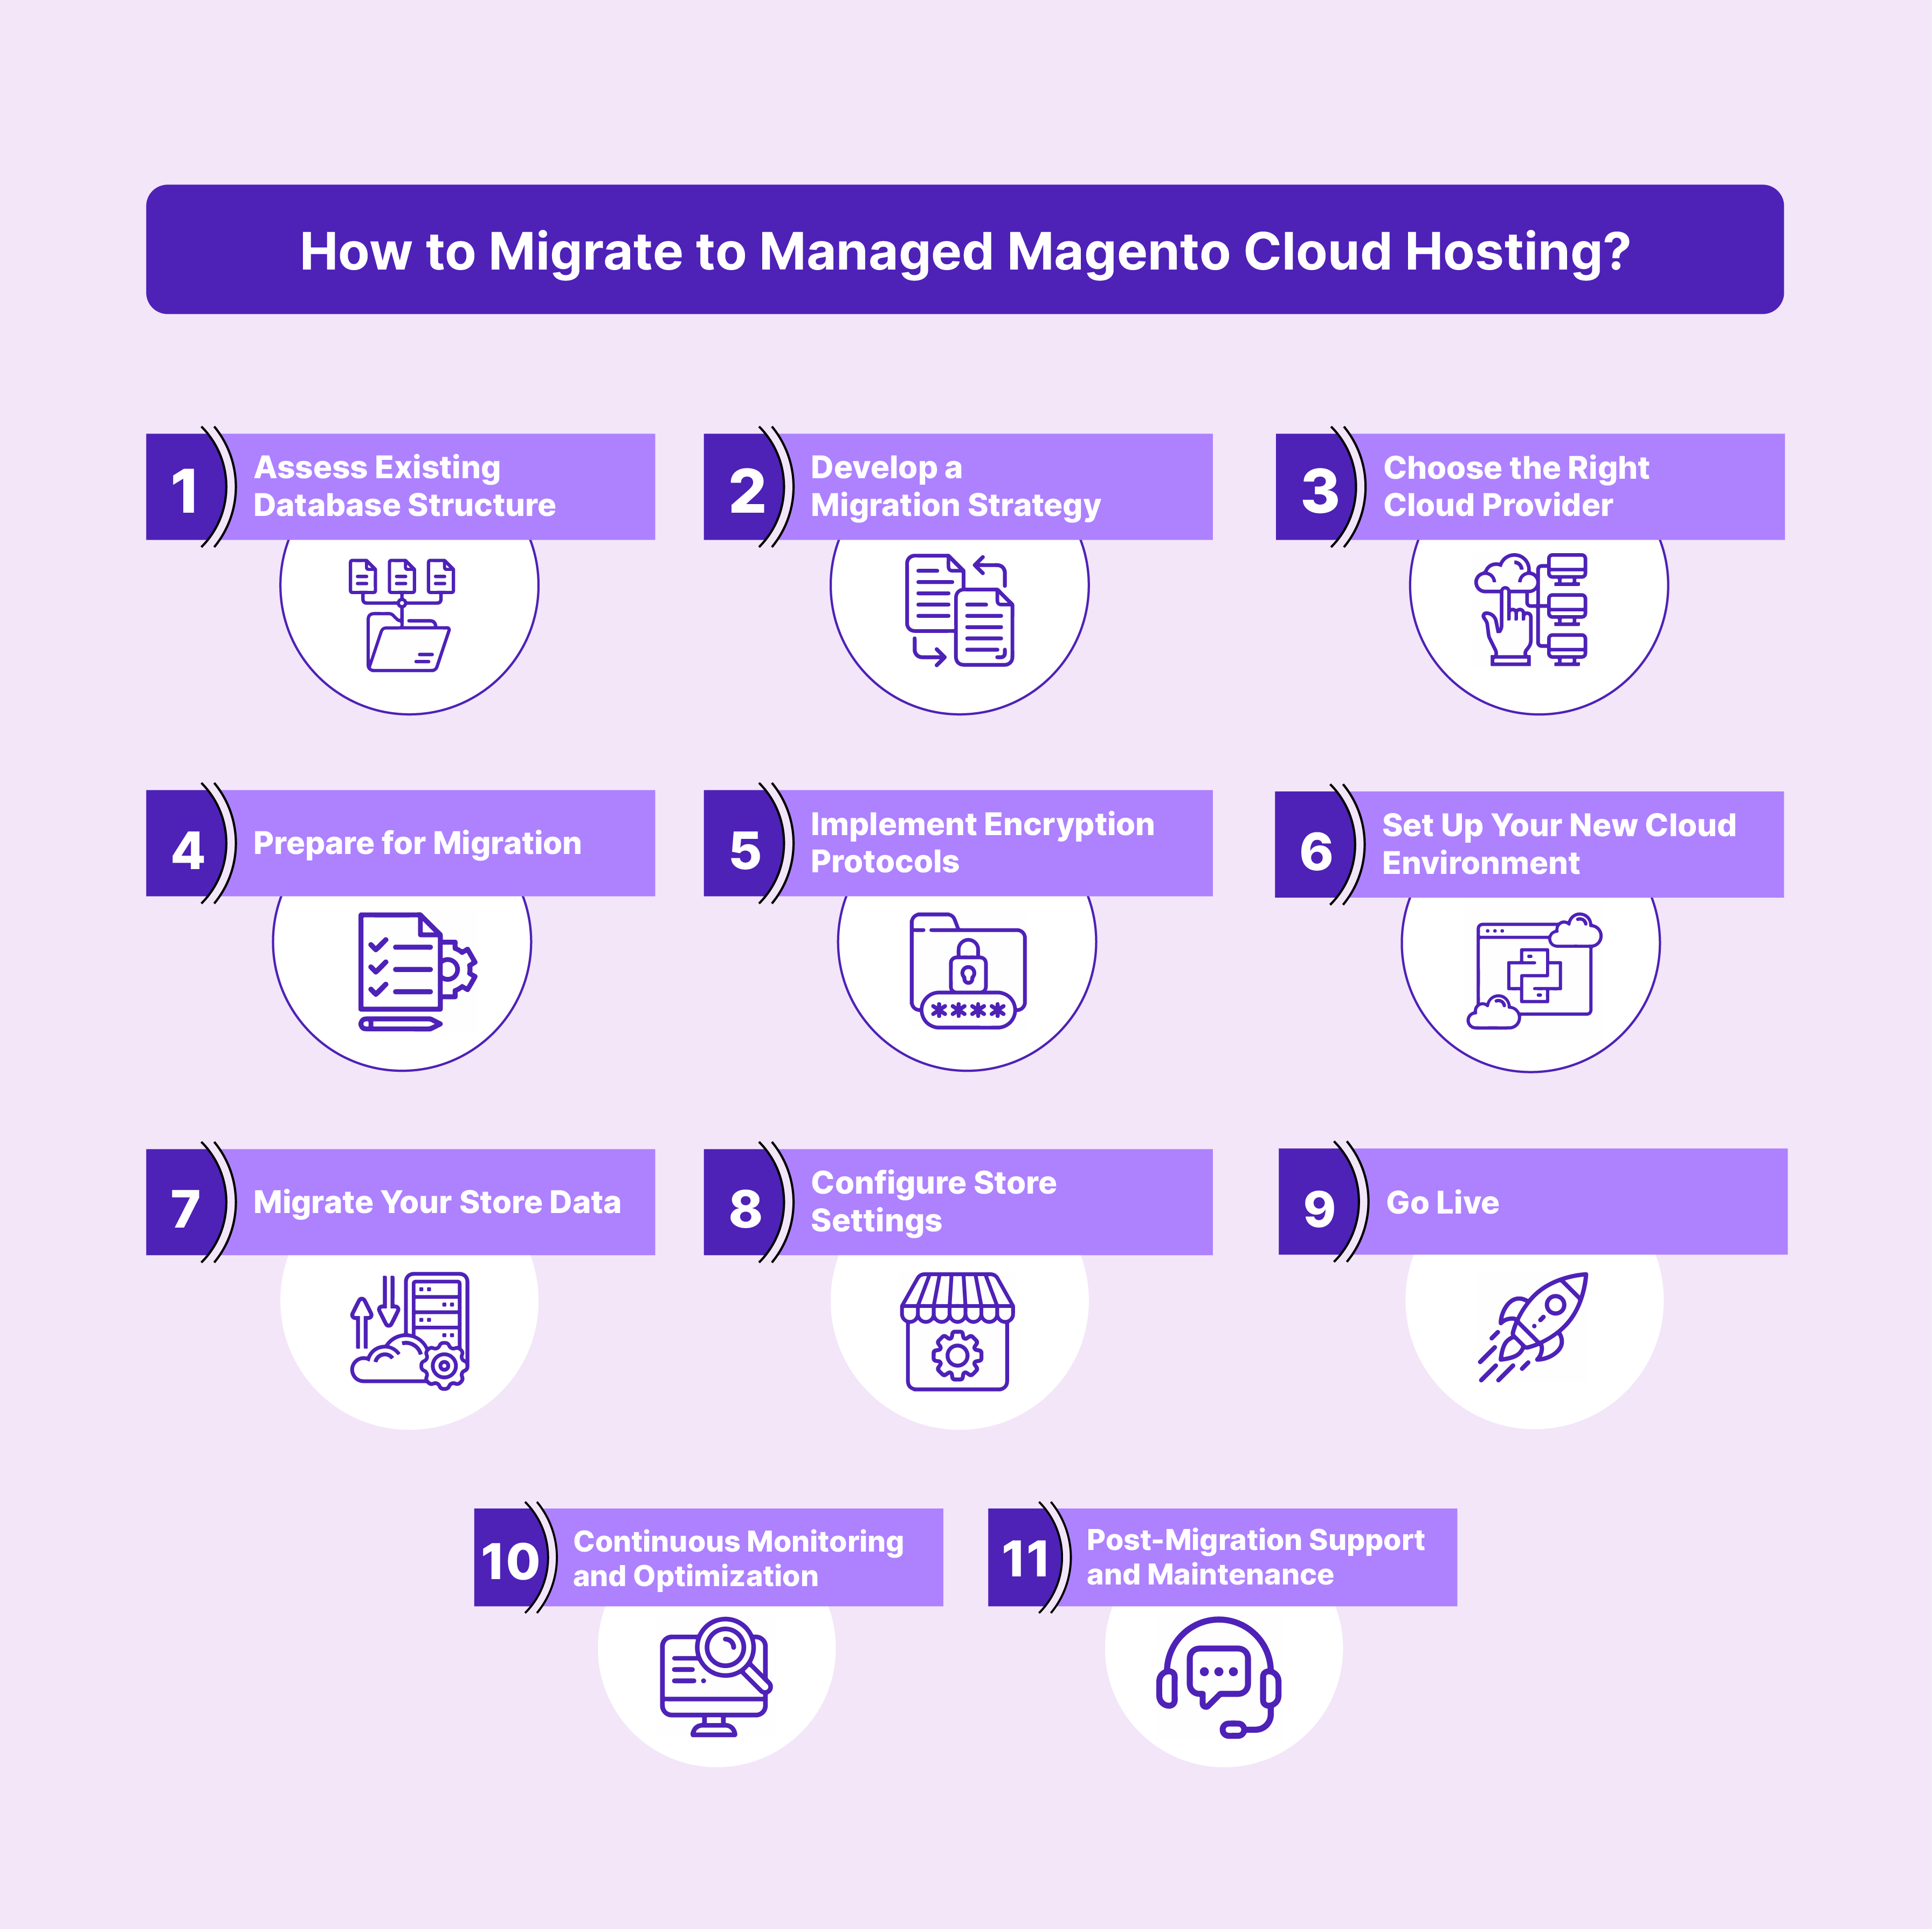 Step-by-step guide to migrating to Managed Magento Cloud Hosting